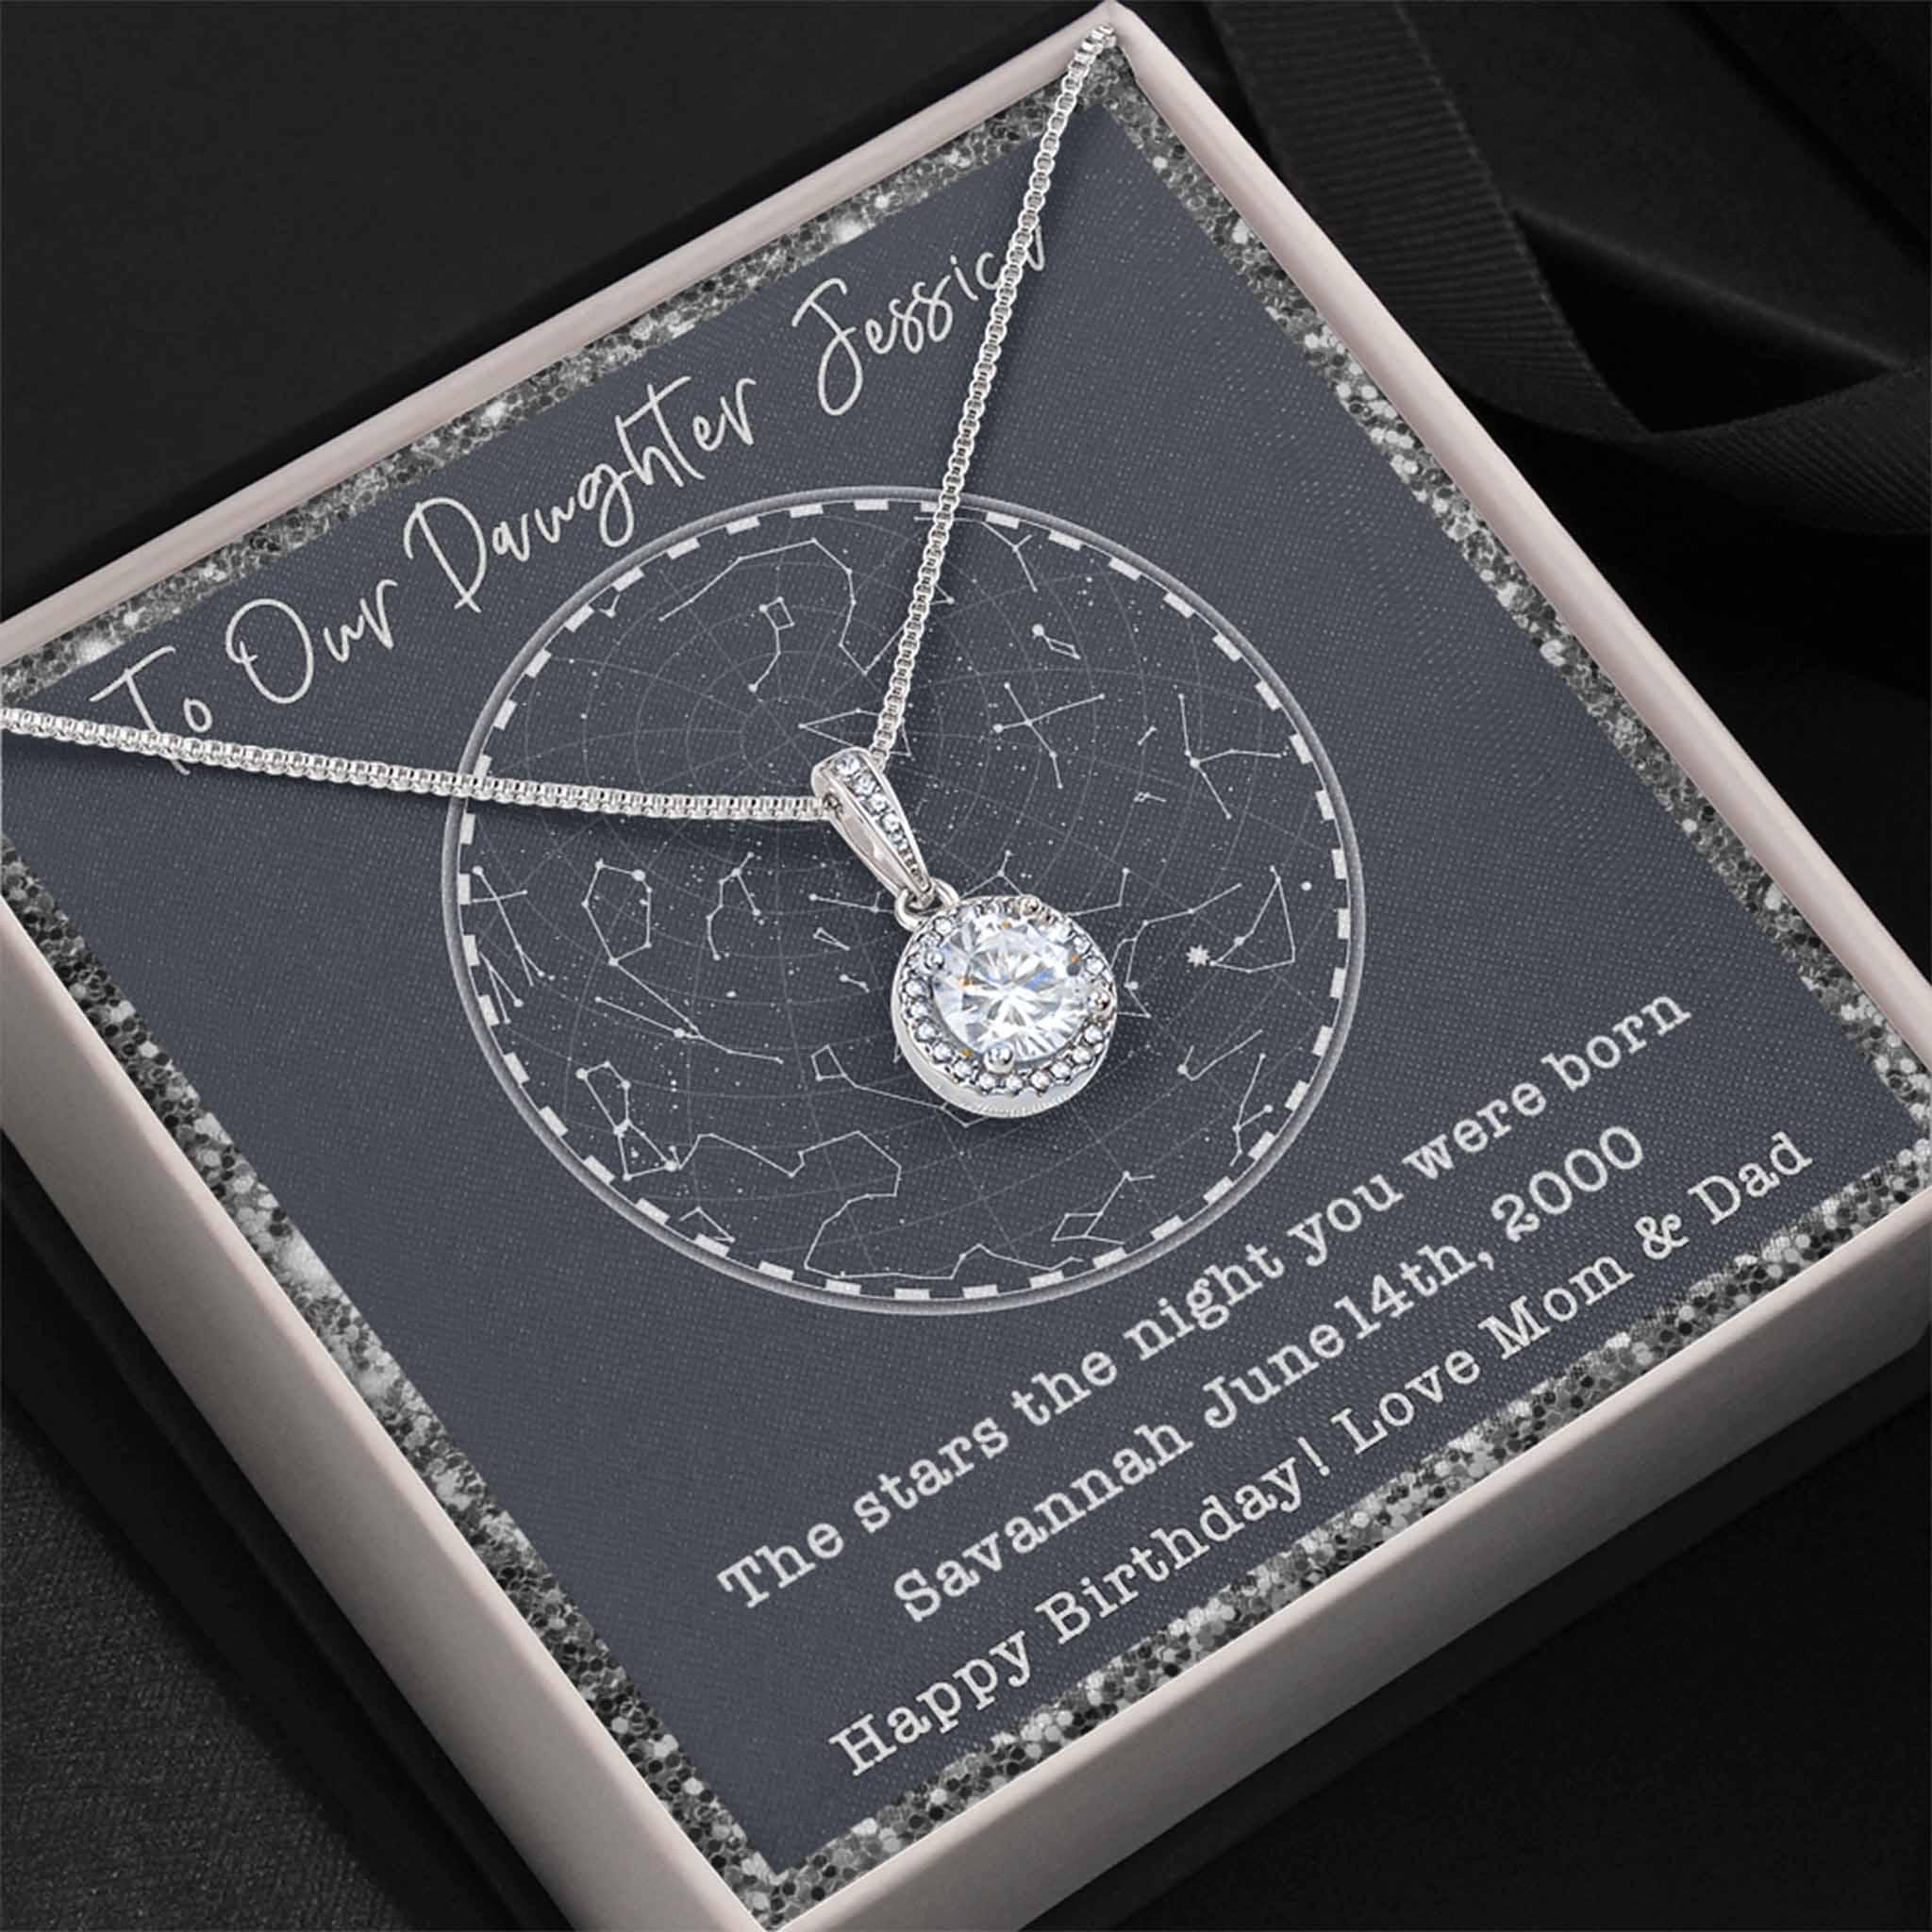 Eternal Hope Necklace Star Map v1 Personalized Insert CardCustomly Gifts